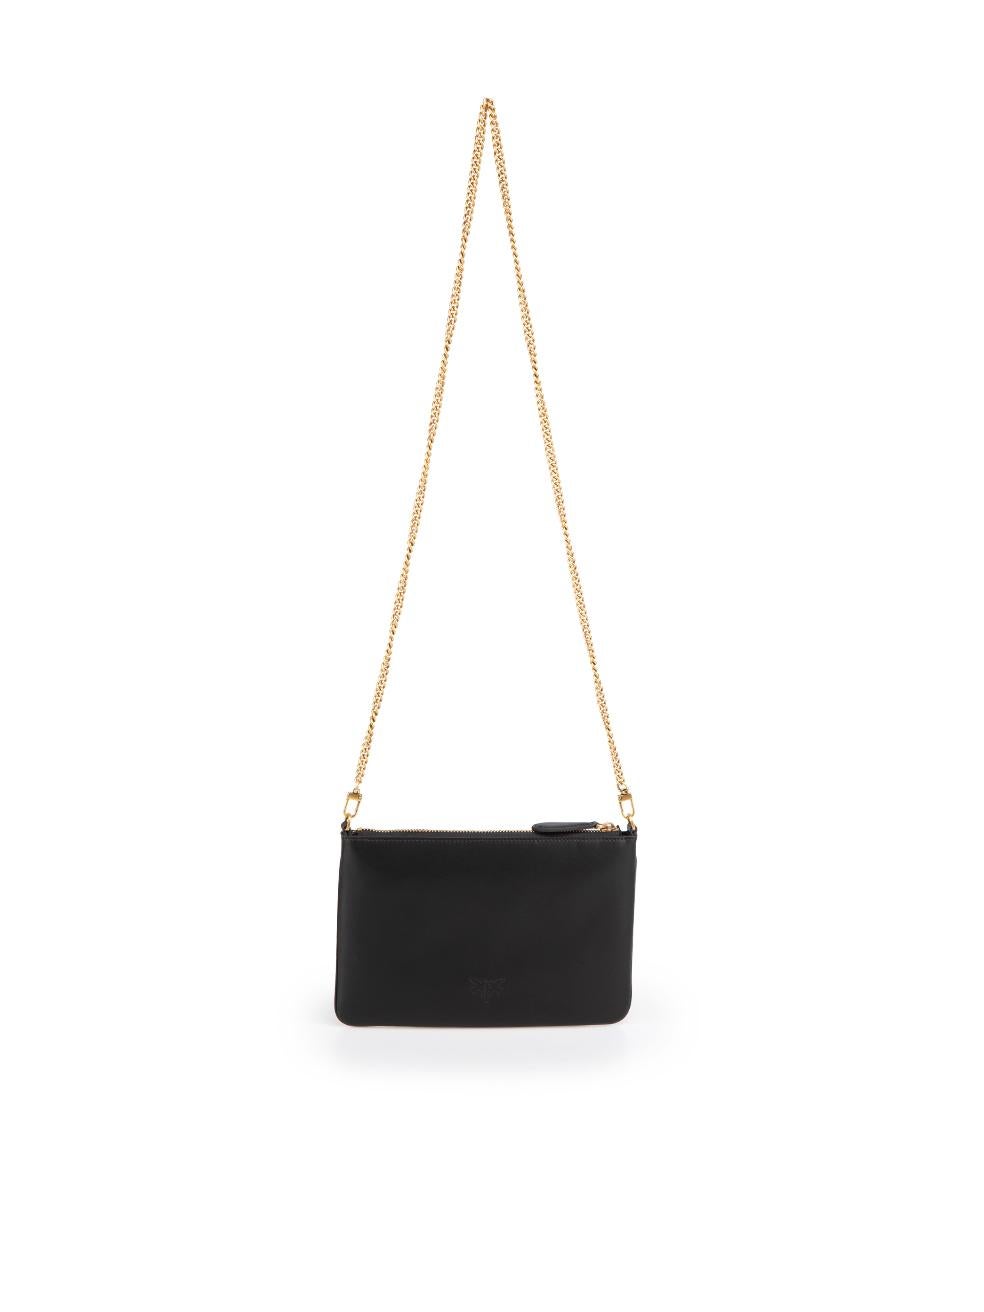 Pinko Black Leather Classic Flat Love Bag Simply In New Condition For Sale In London, GB